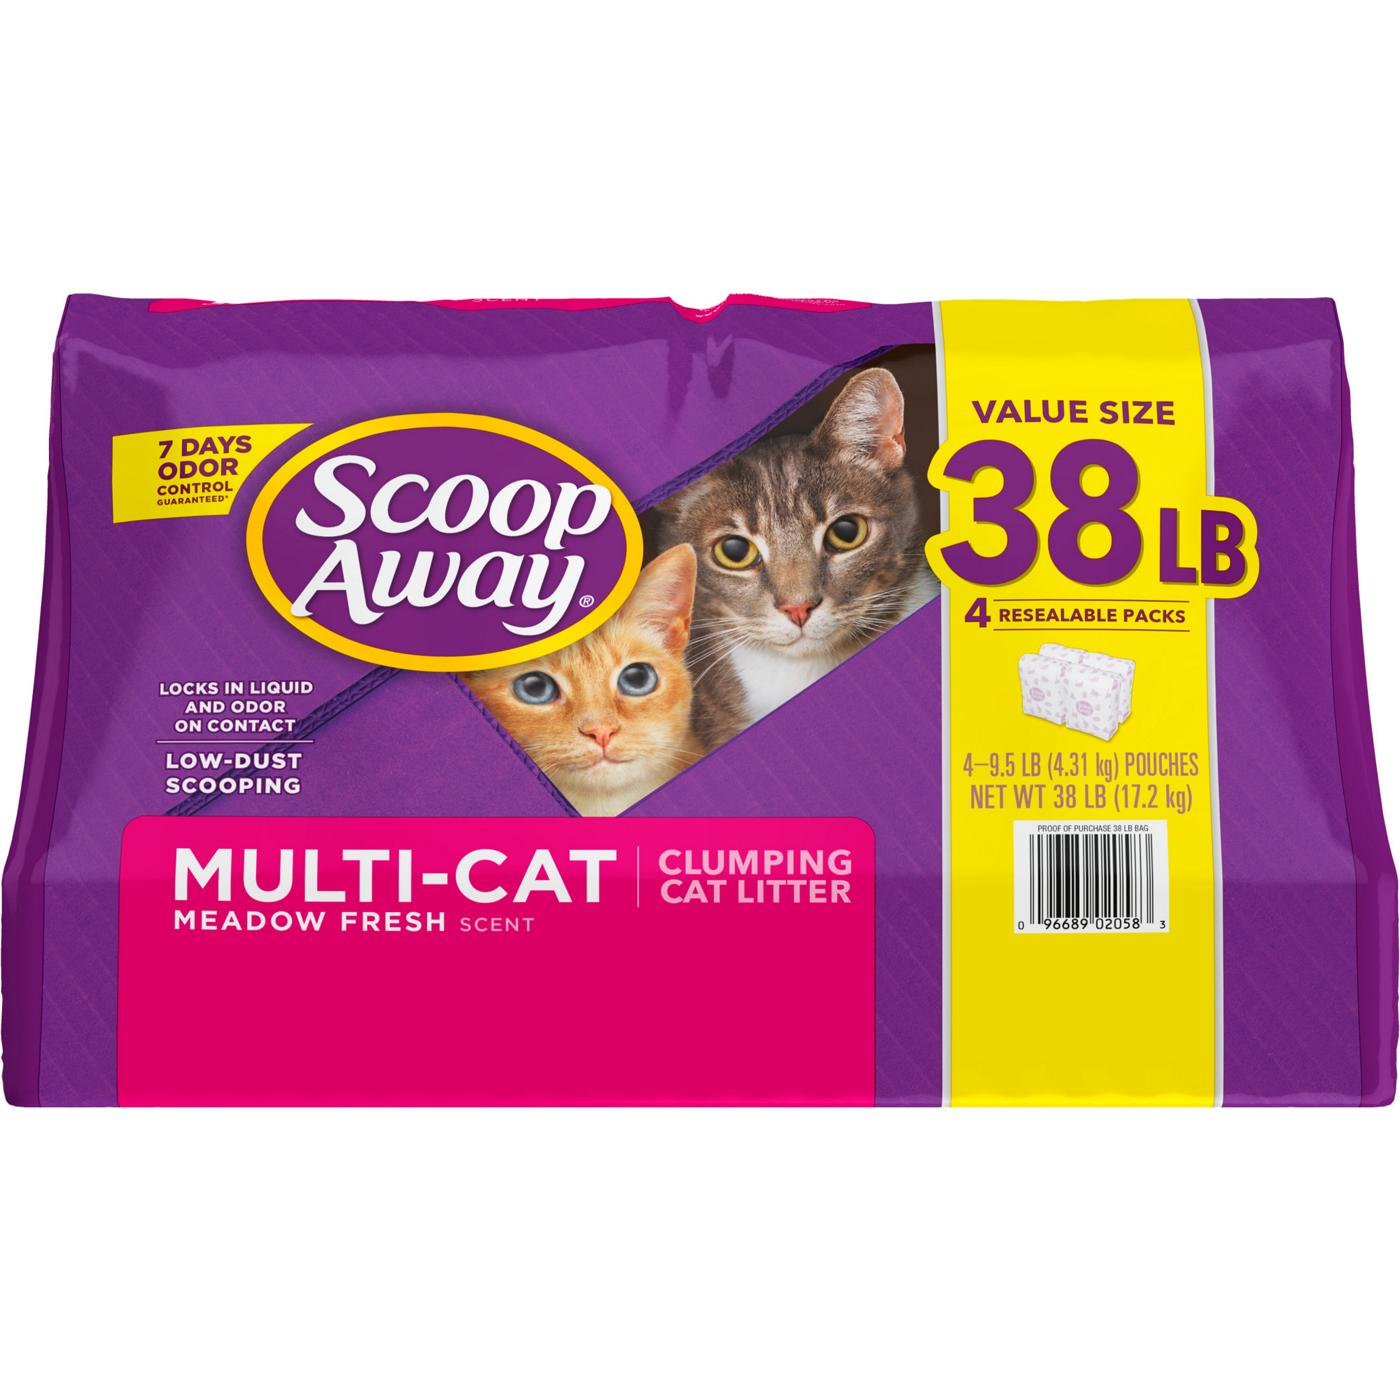 Scoop Away Multi Cat Clumping Cat Litter, Meadow Fresh Scent; image 1 of 5